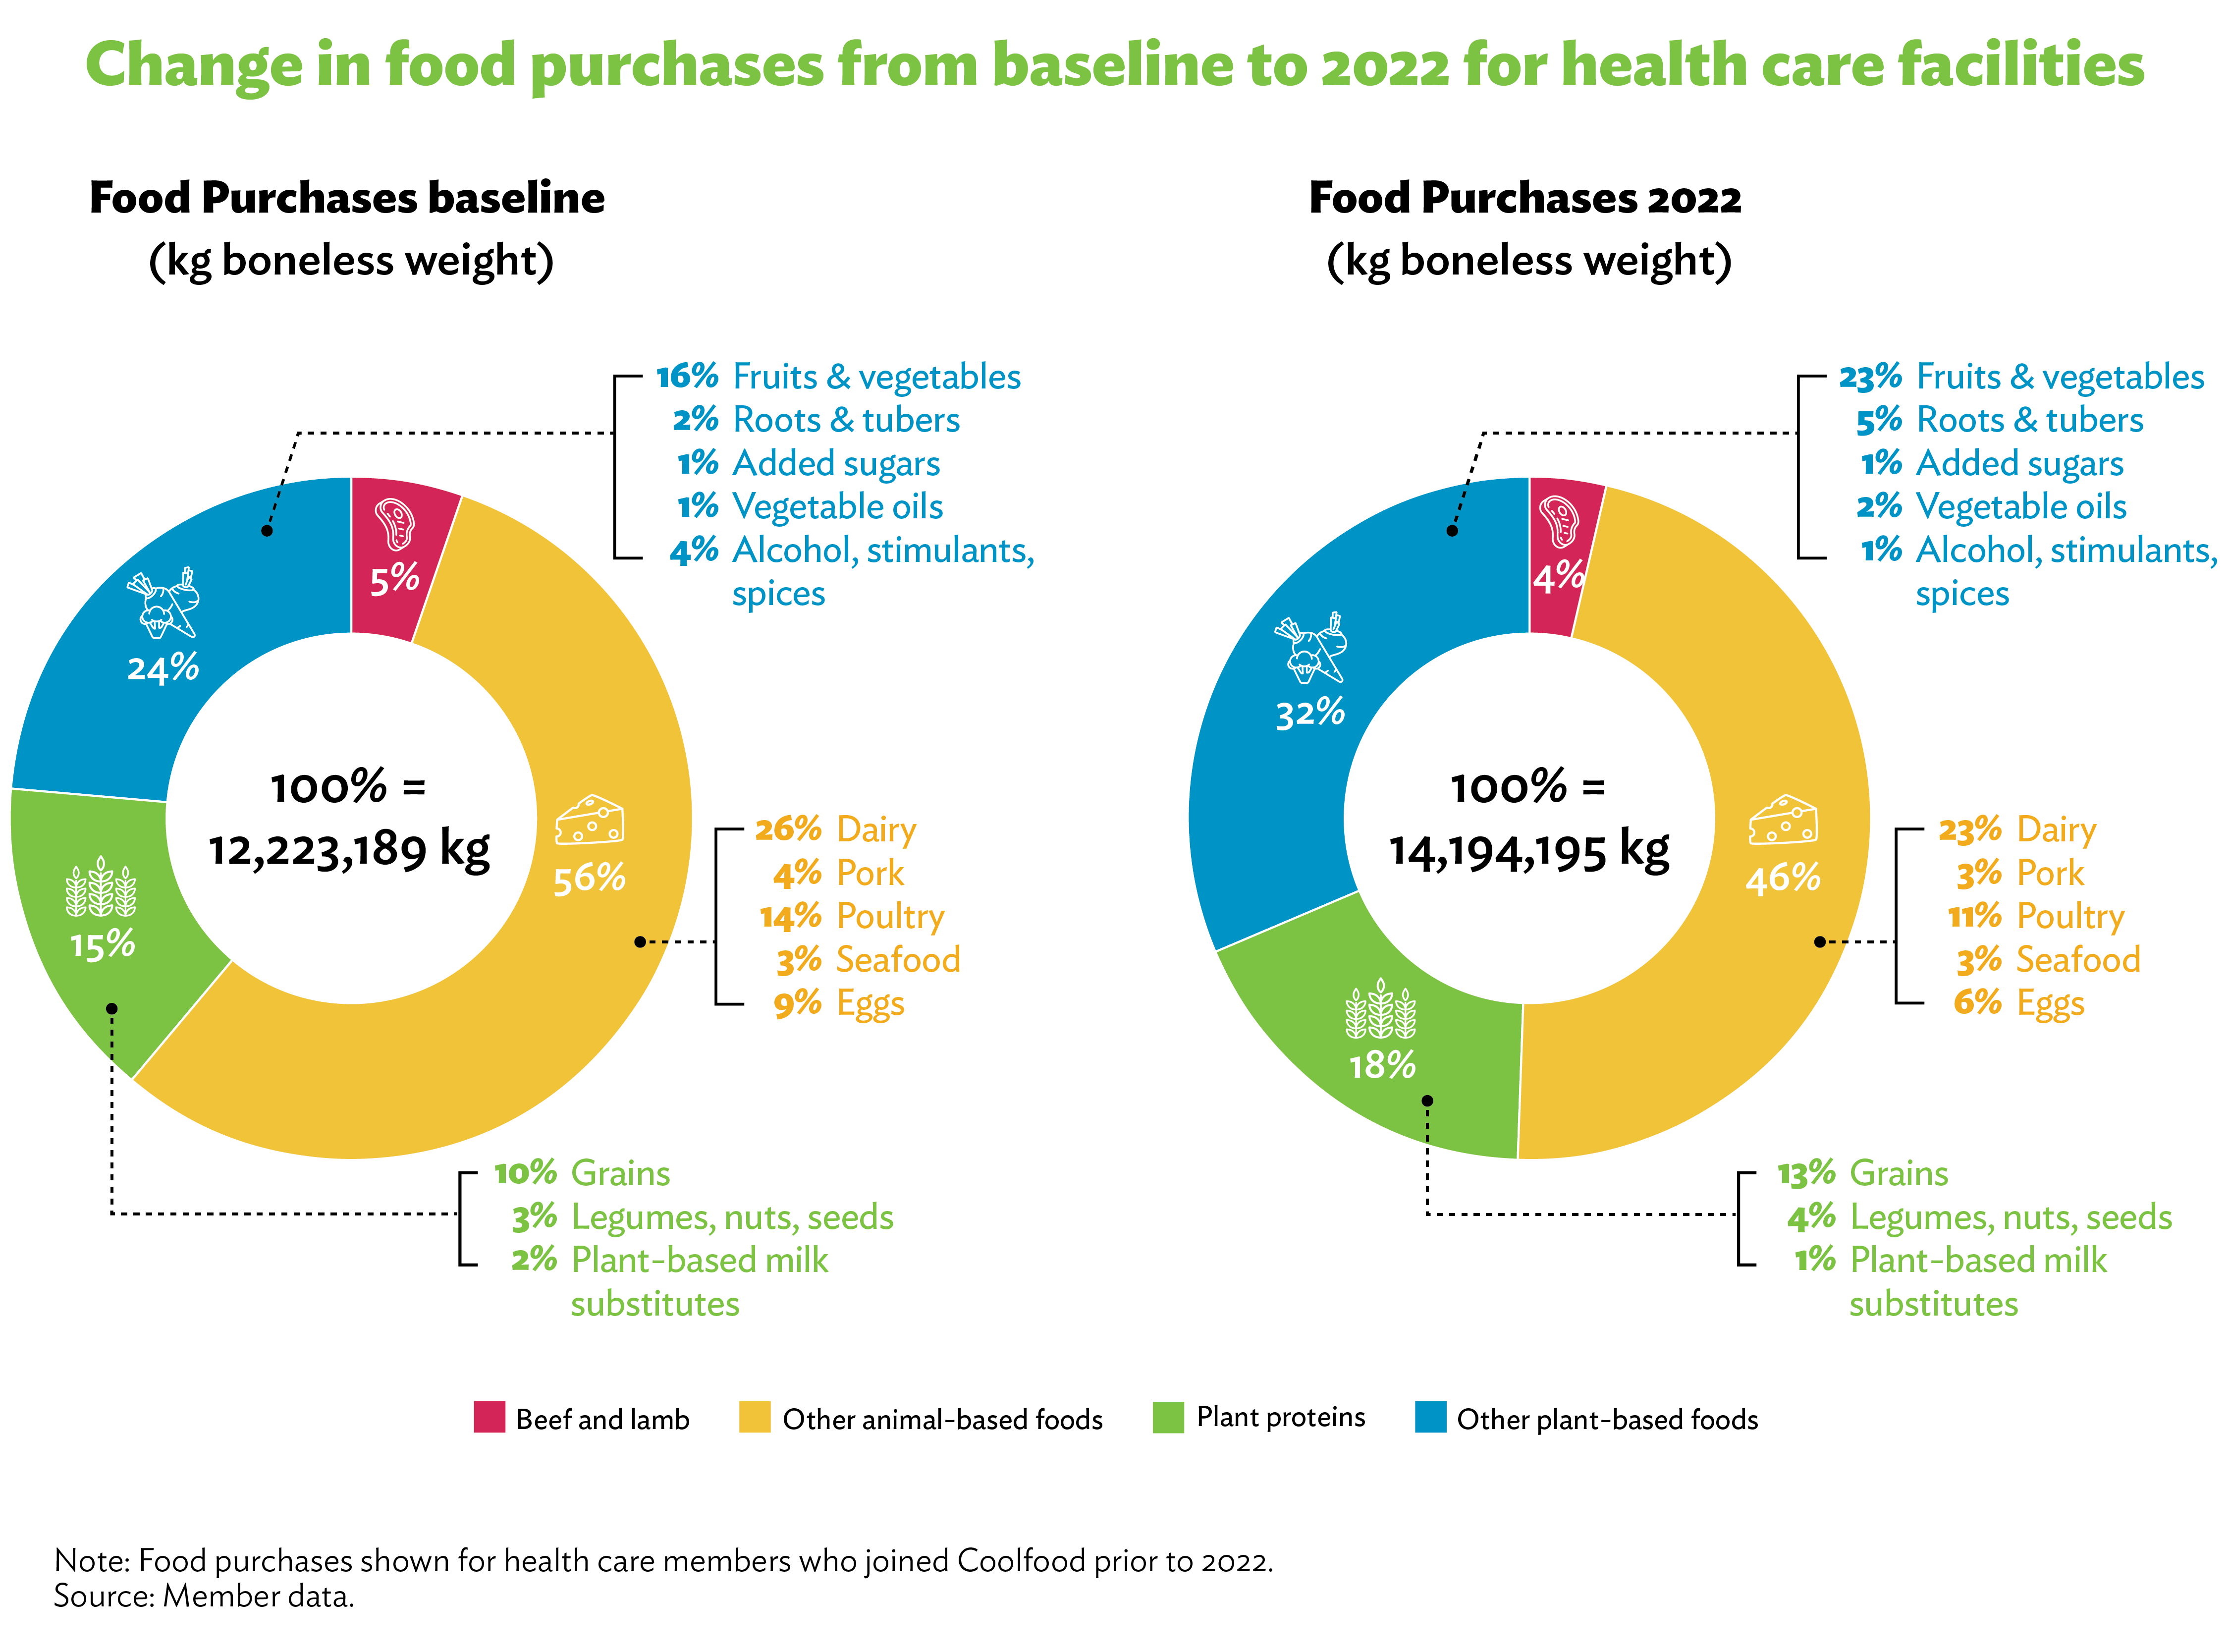 Figure 1: Change in food purchases from baseline to 2022 for health care facilities